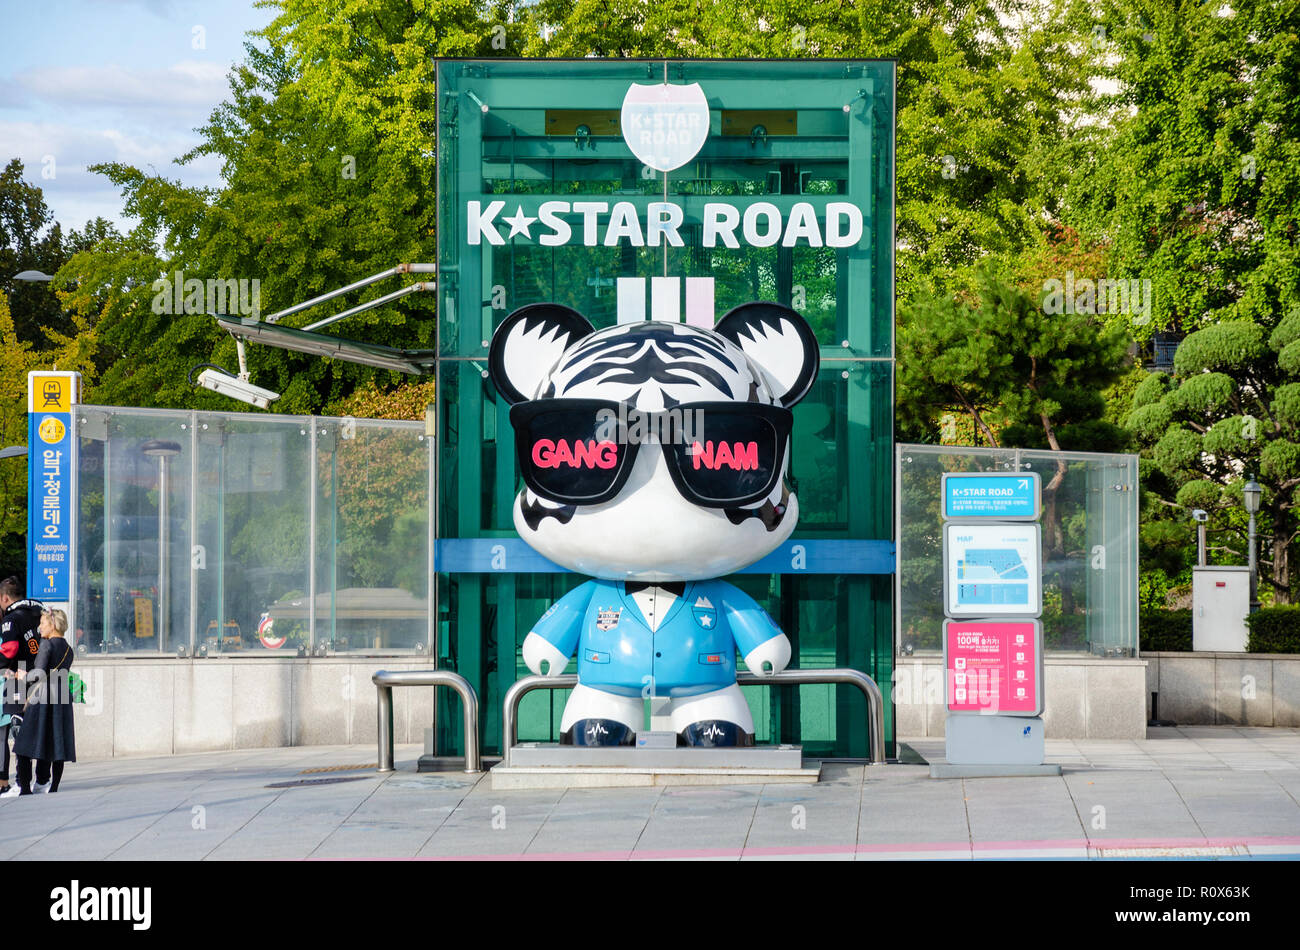 The start of the K*Star road Art Project, a 1km stretch decorated with GangnamDols in Gangnam, Seoul, South Korea. Stock Photo